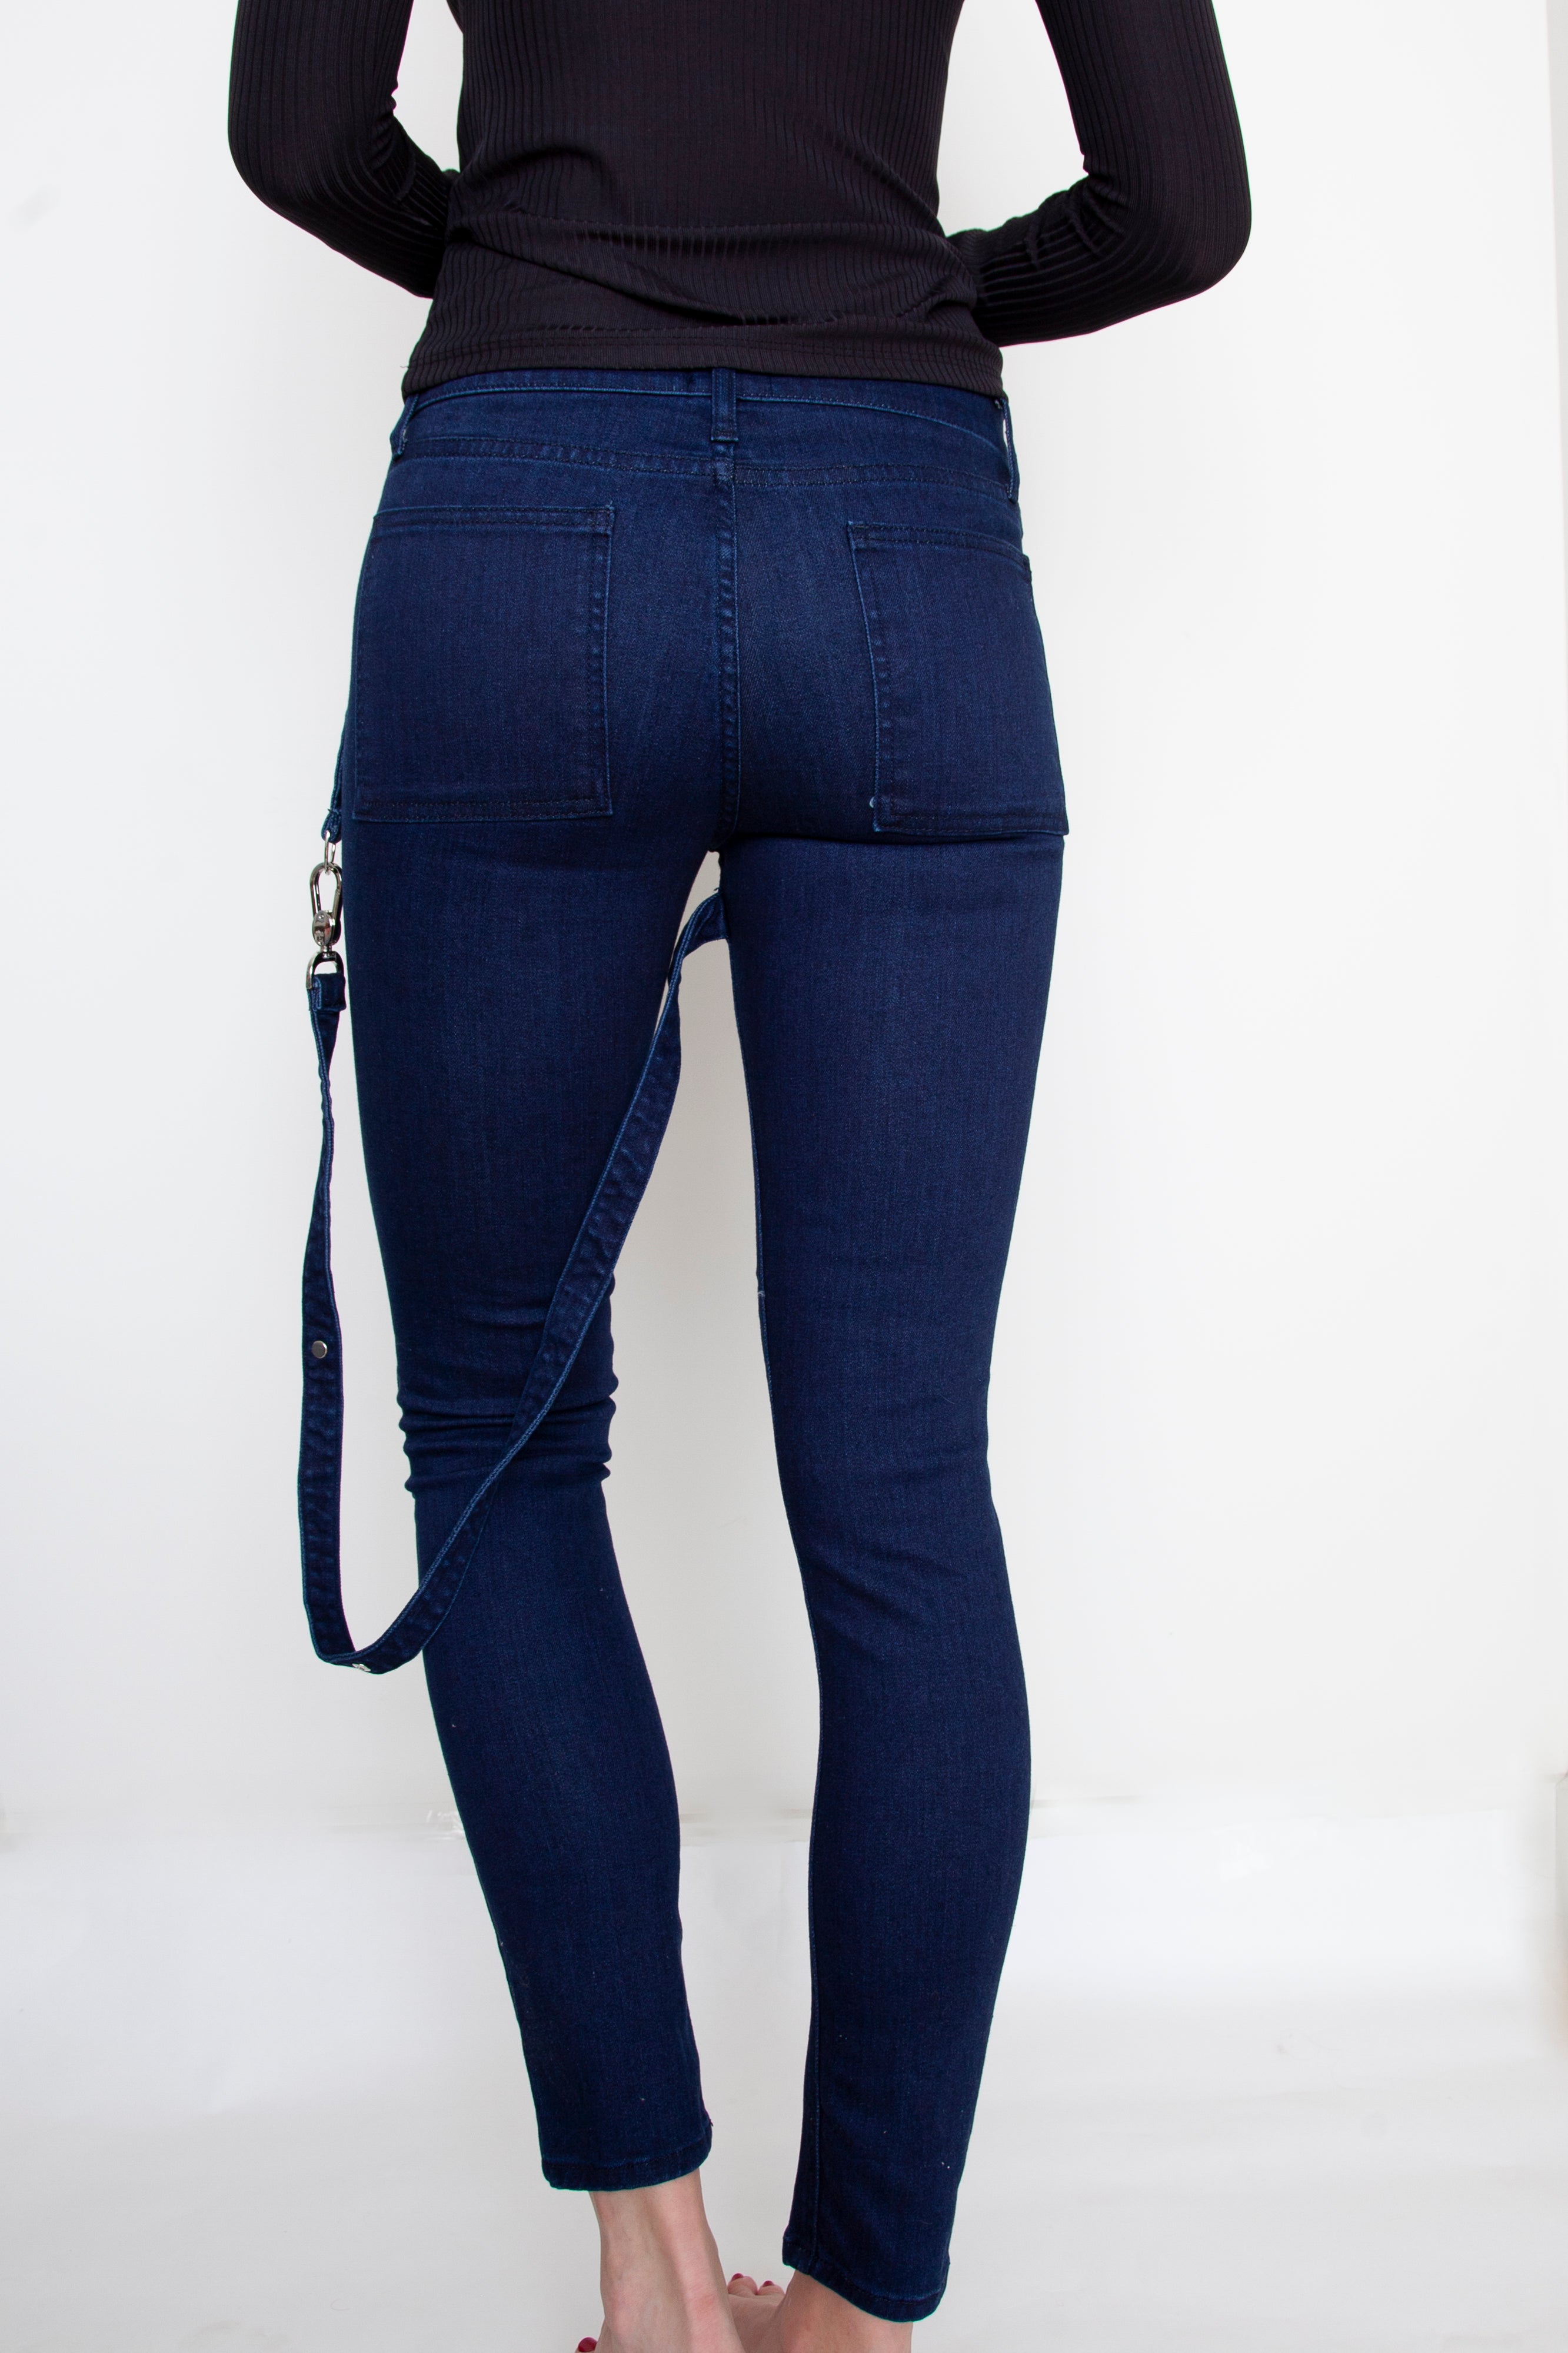 Navy Strappy Jeans For Charity - Arianne Elmy